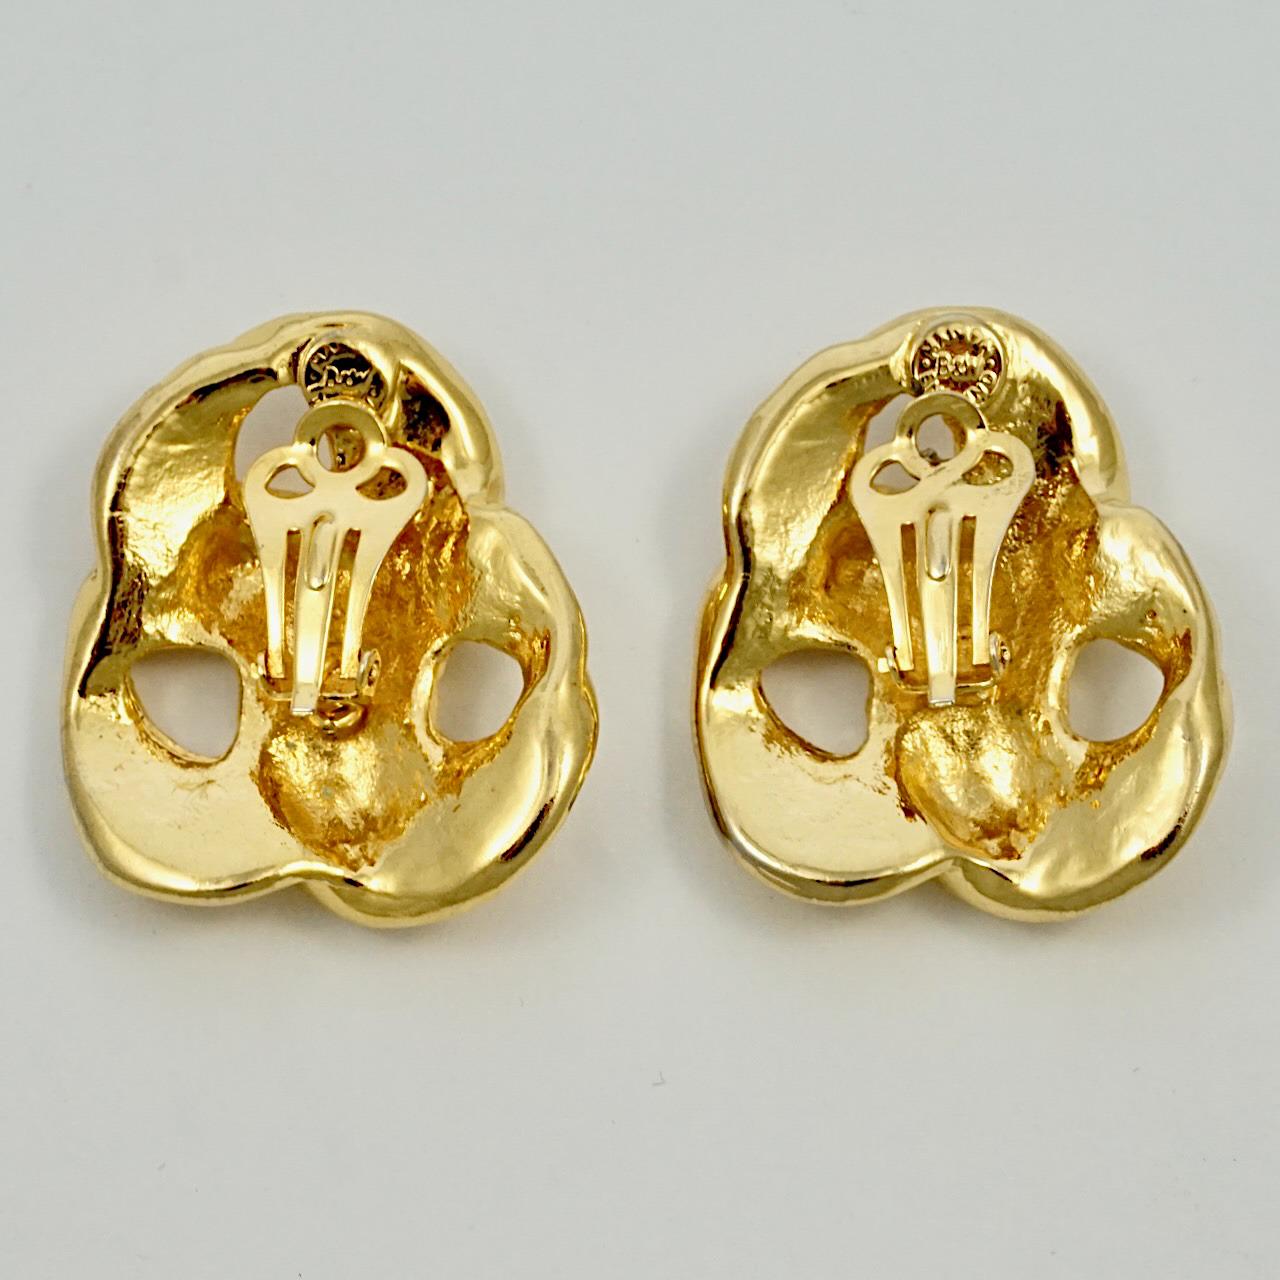 Glamorous Butler & Wilson gold plated clip on earrings with a triple twist ridged design. Measuring 3.3 cm / 1.3 inches by 2.9 cm / 1.14 inches.

This is a lovely pair of classic twist earrings, by London designers Butler & Wilson.

Nicky Butler and